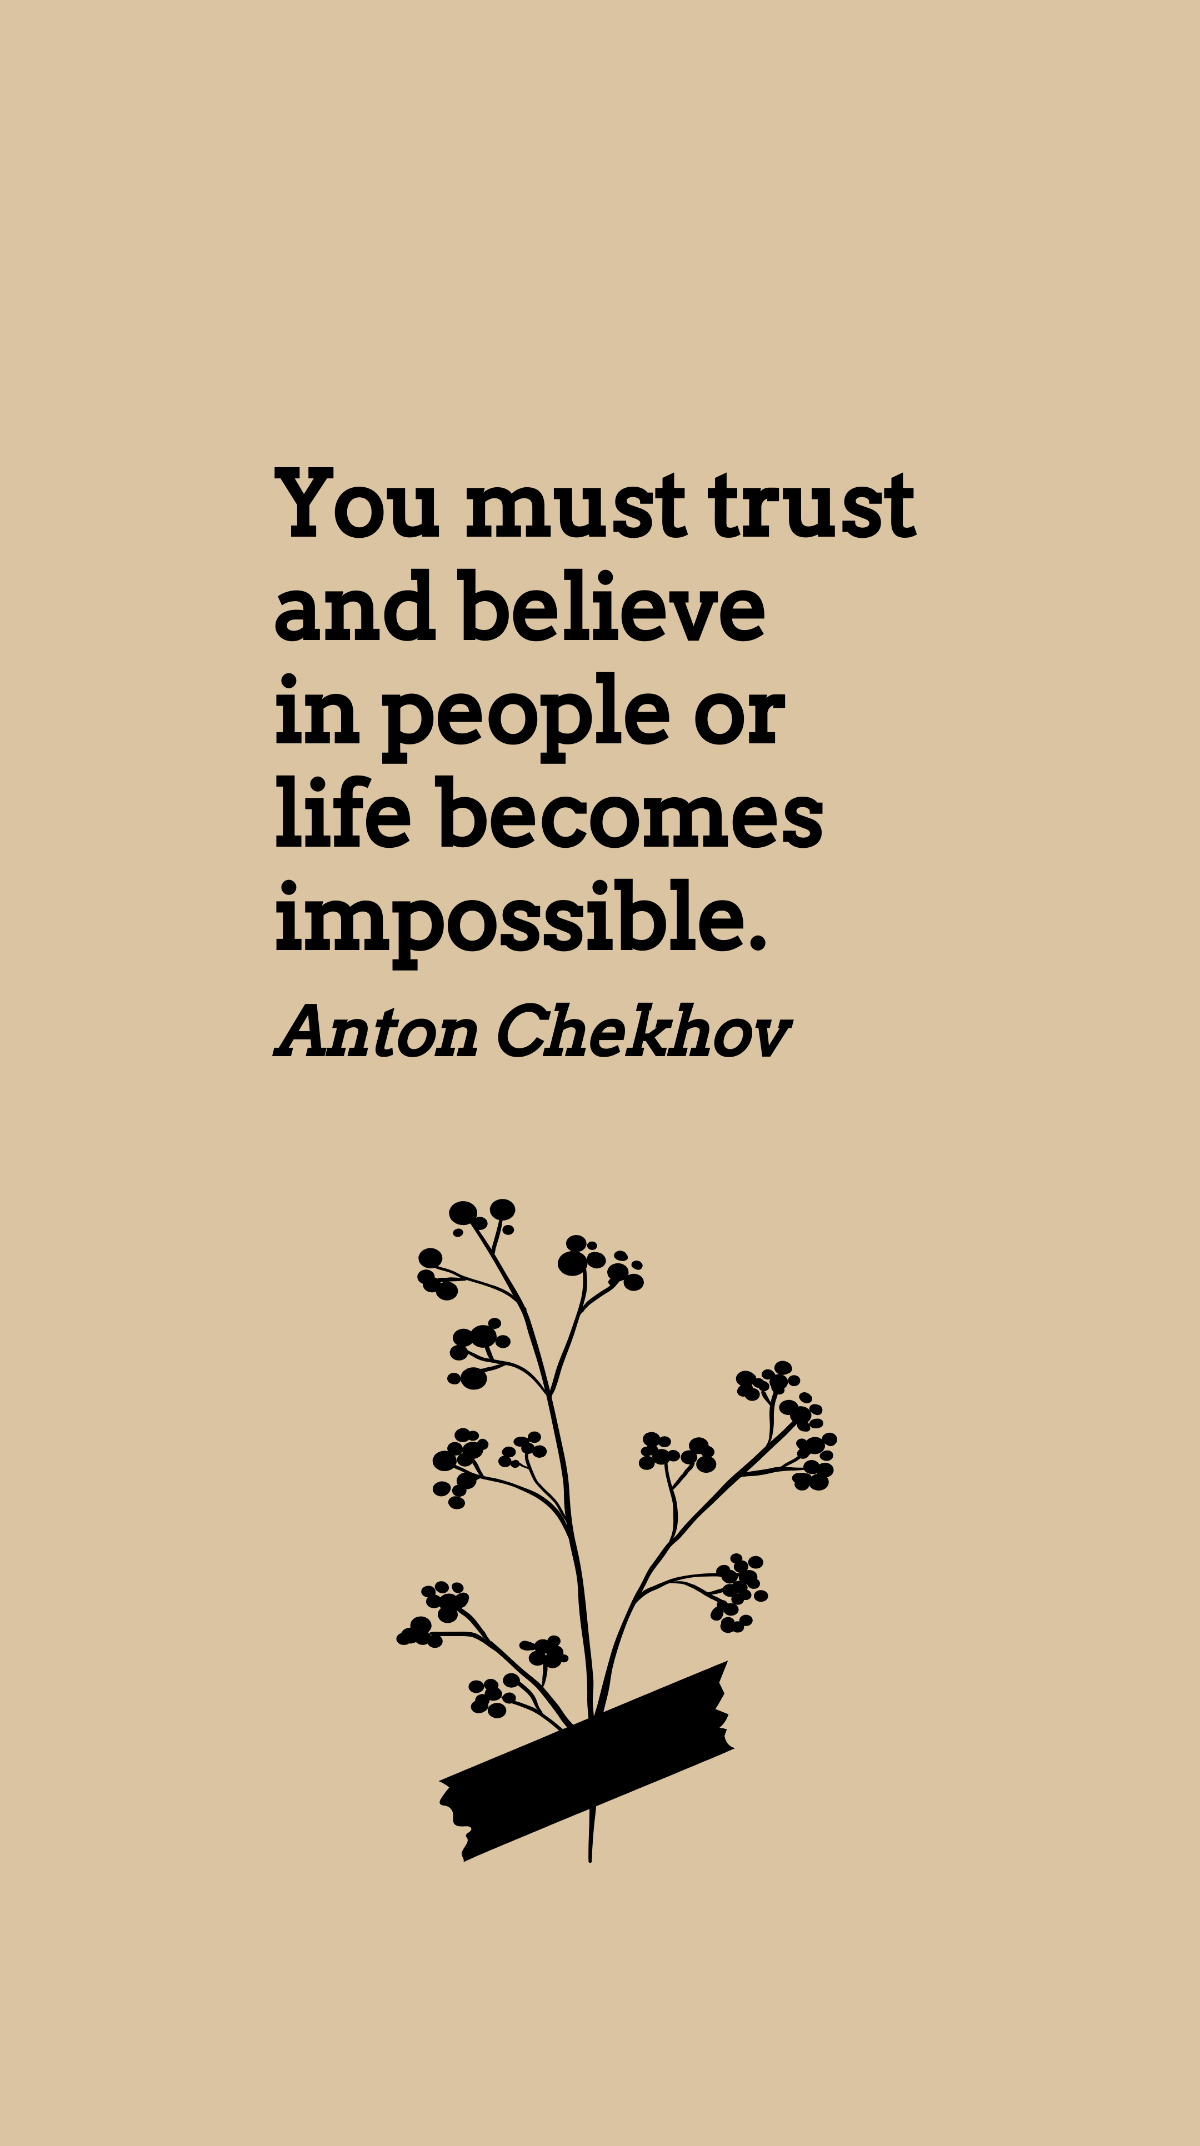 Anton Chekhov - You must trust and believe in people or life becomes impossible. Template